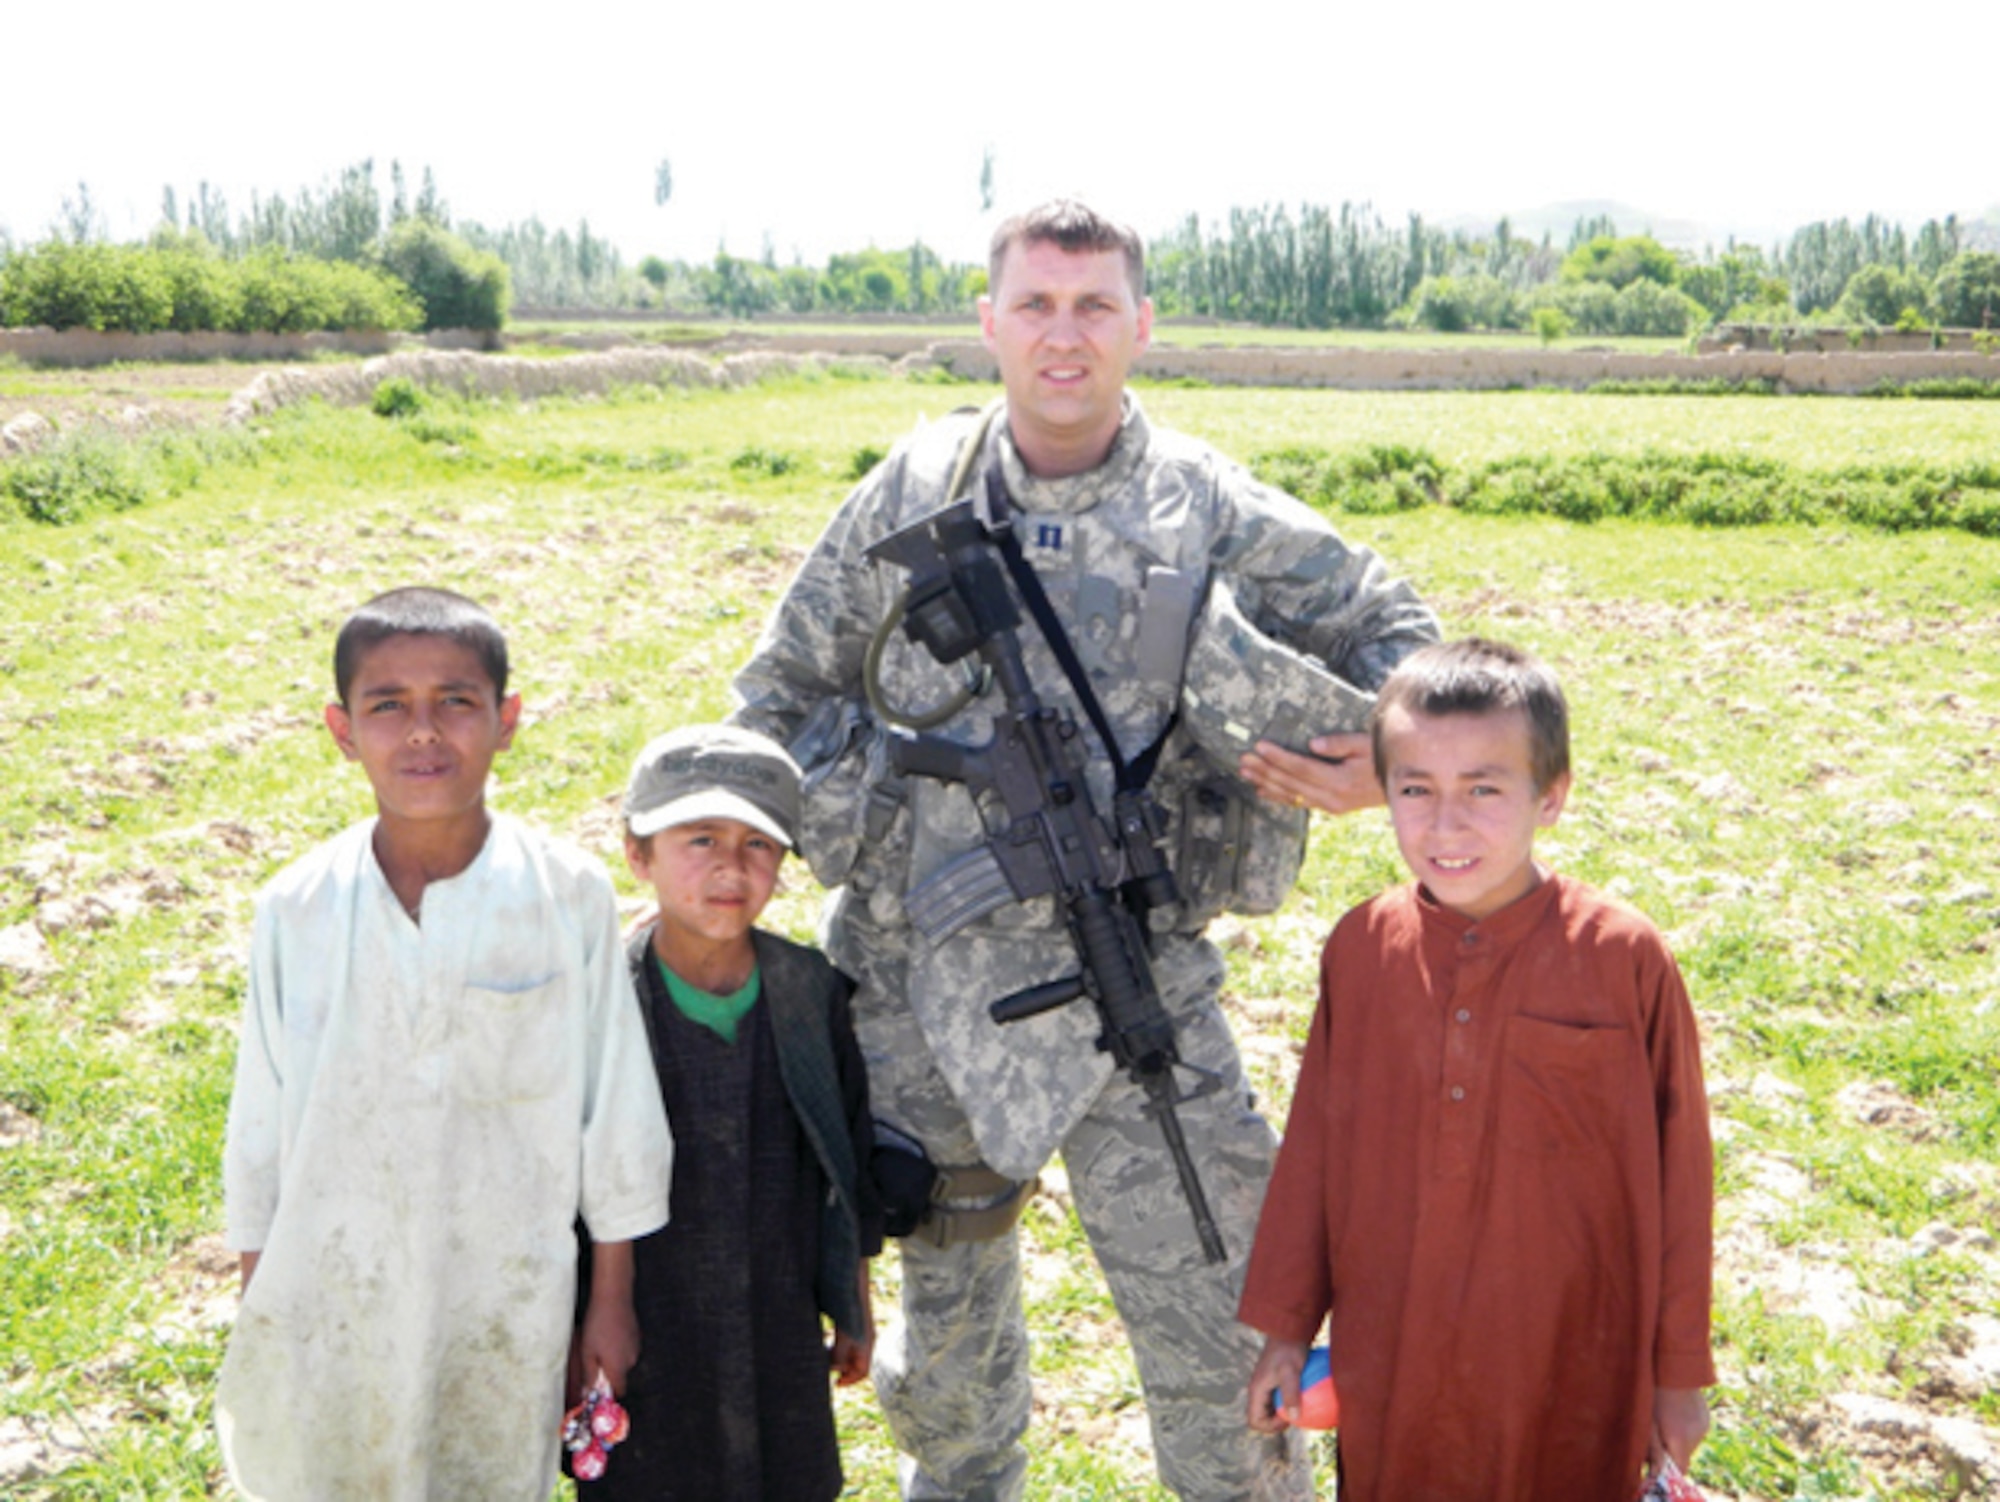 Capt. David Simons, Jr., 452nd Civil Engineer Squadron, March ARB, poses for a photo with Afgan children after handing out candy and toys during his deployment in 2010.  (U.S. Air Force photo/1st Lt. Branden DeLong )